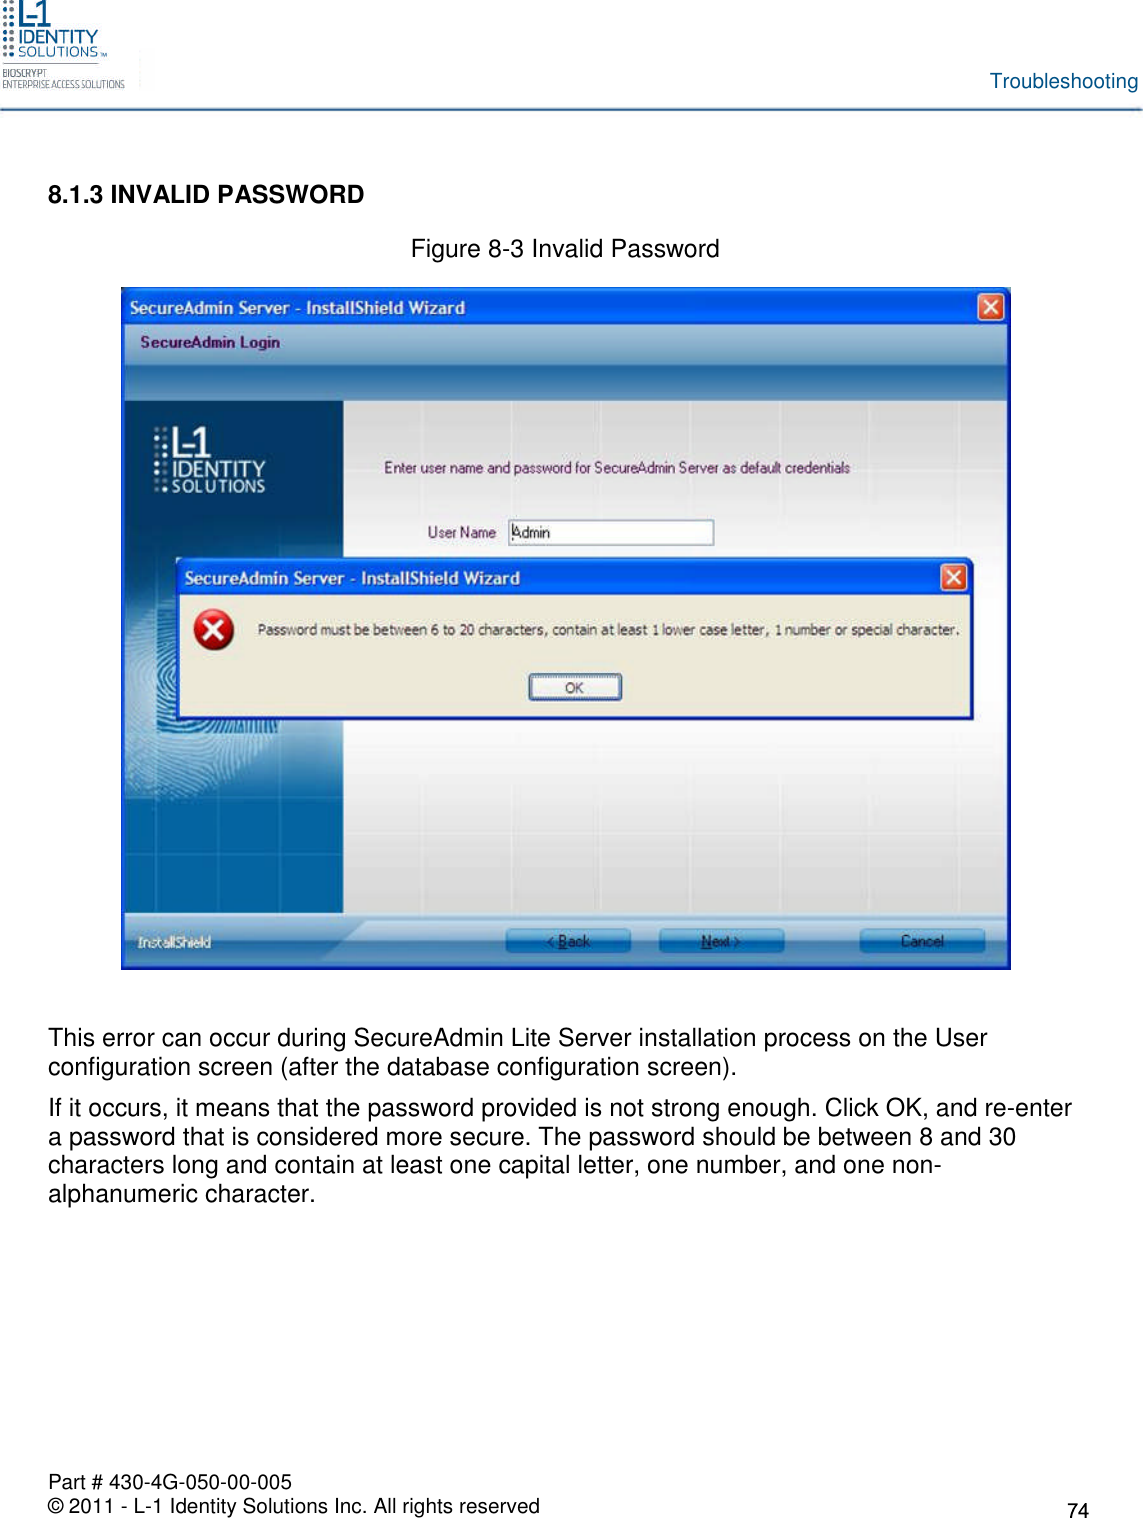 Part # 430-4G-050-00-005© 2011 - L-1 Identity Solutions Inc. All rights reservedTroubleshooting8.1.3 INVALID PASSWORDFigure 8-3 Invalid PasswordThis error can occur during SecureAdmin Lite Server installation process on the Userconfiguration screen (after the database configuration screen).If it occurs, it means that the password provided is not strong enough. Click OK, and re-entera password that is considered more secure. The password should be between 8 and 30characters long and contain at least one capital letter, one number, and one non-alphanumeric character.